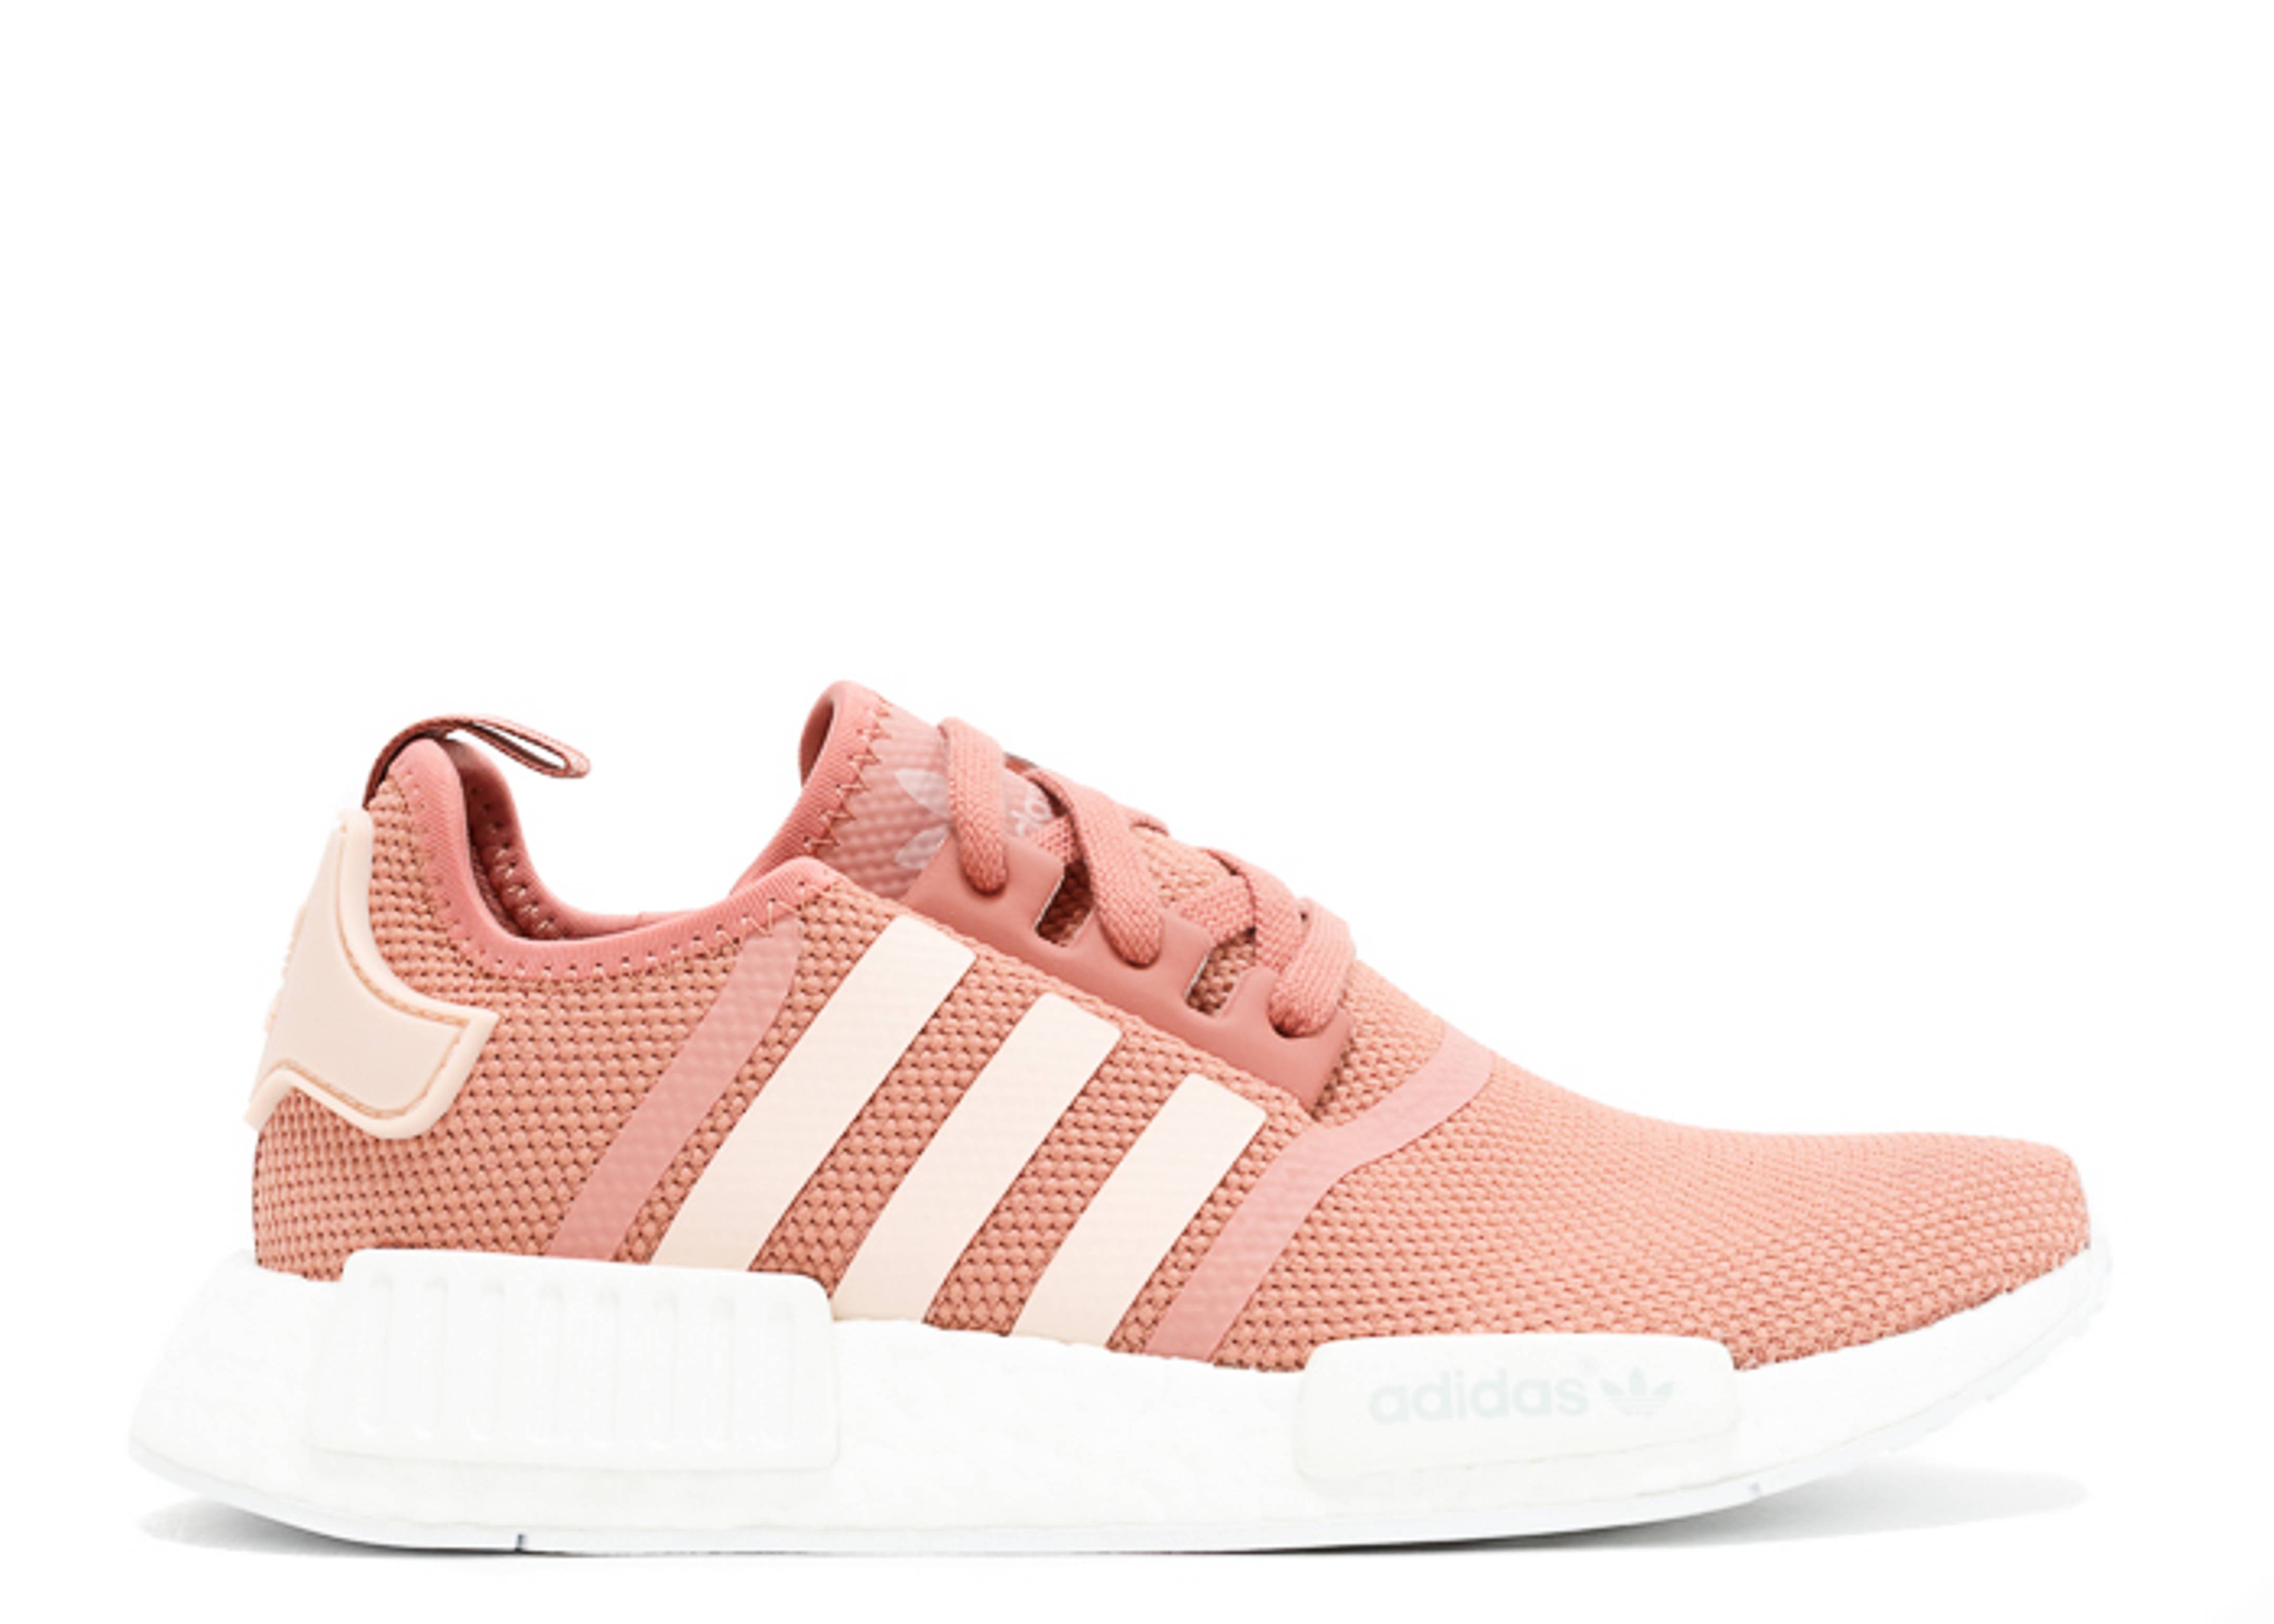 Wmns NMD_R1 'Raw Pink'